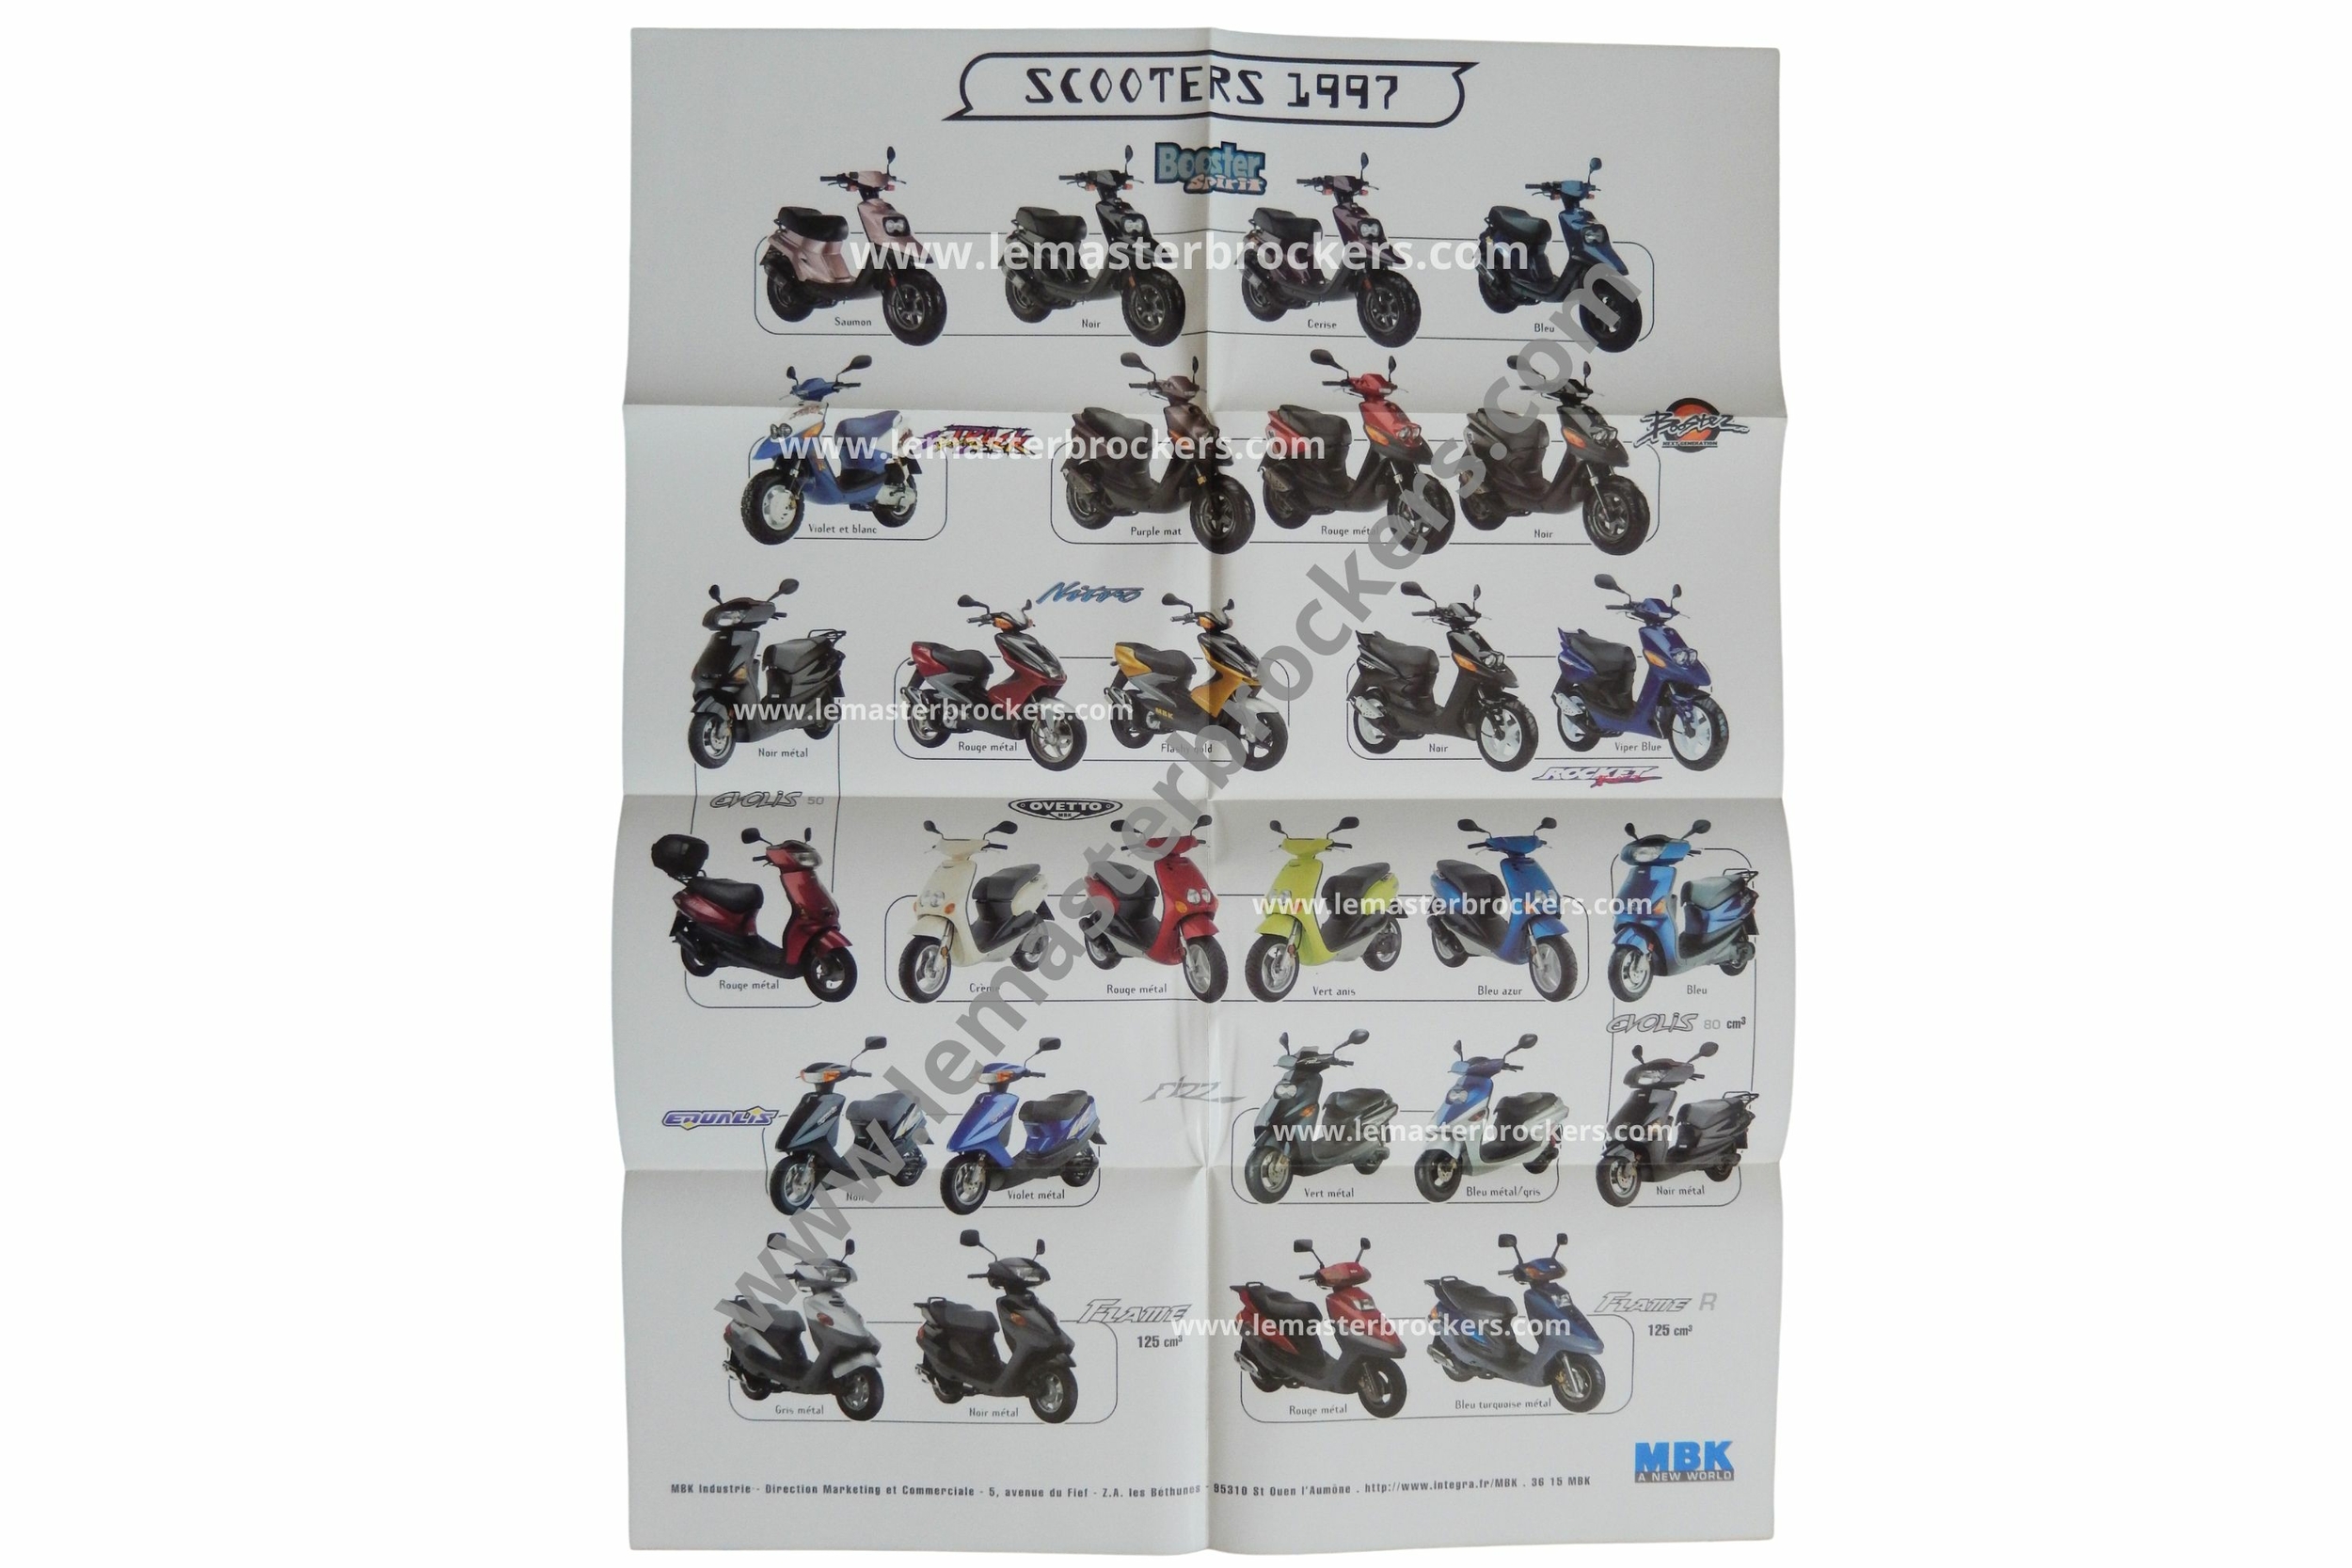 BROCHURE-MBK-SCOOTER-1997-BOOSTER-LEMASTERBROCKERS